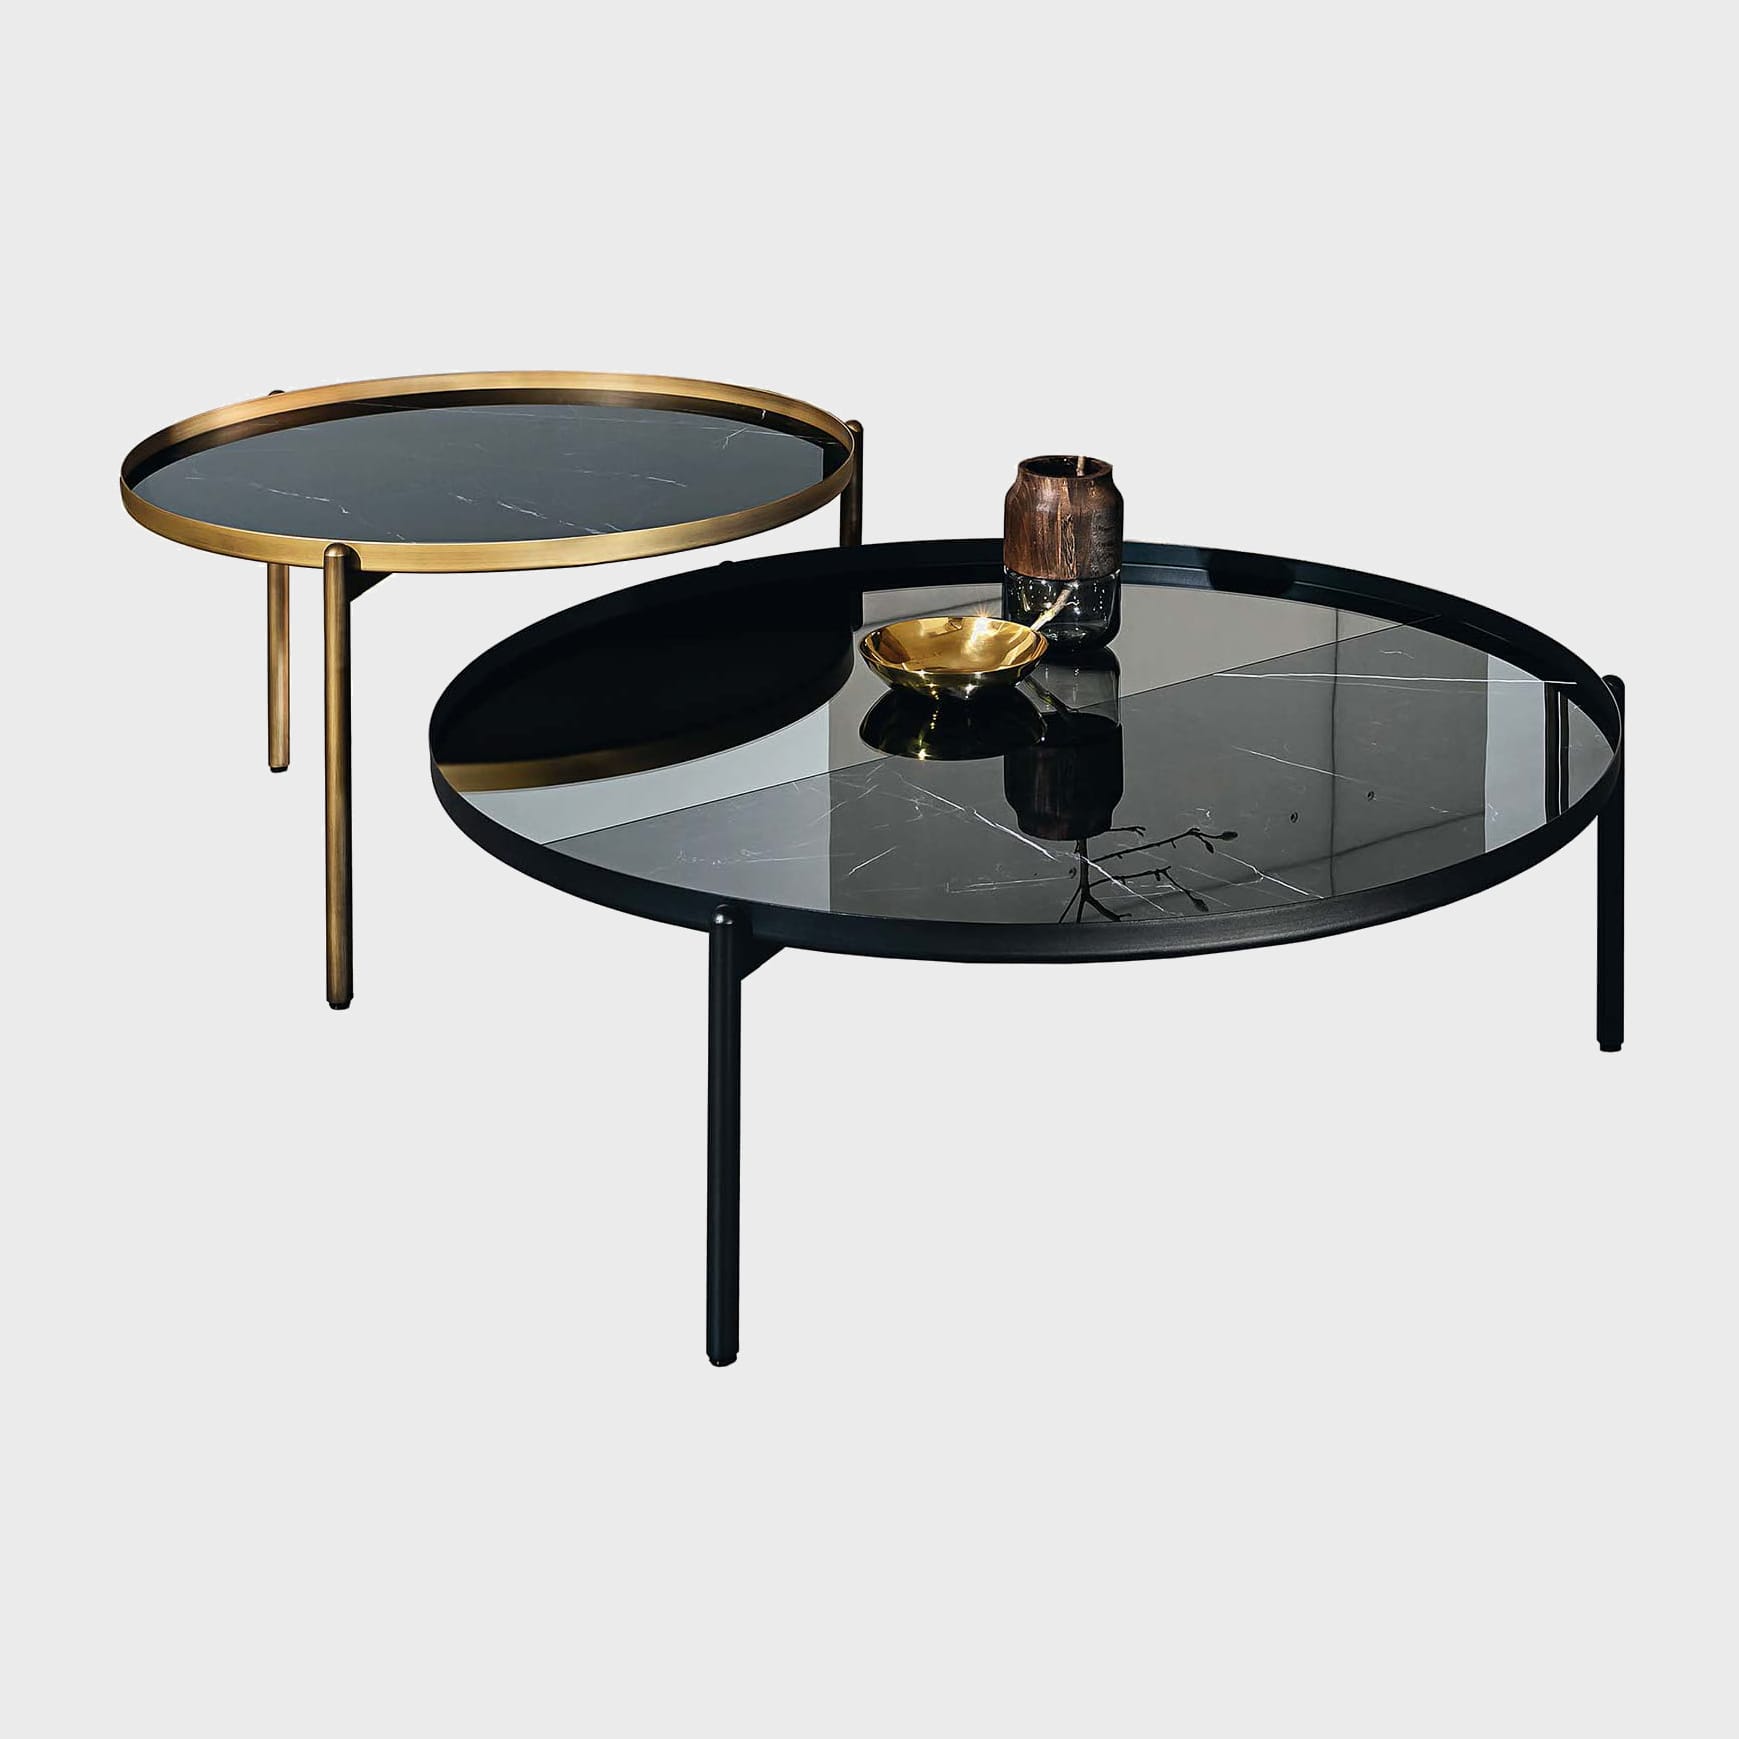 Campos Coffee table